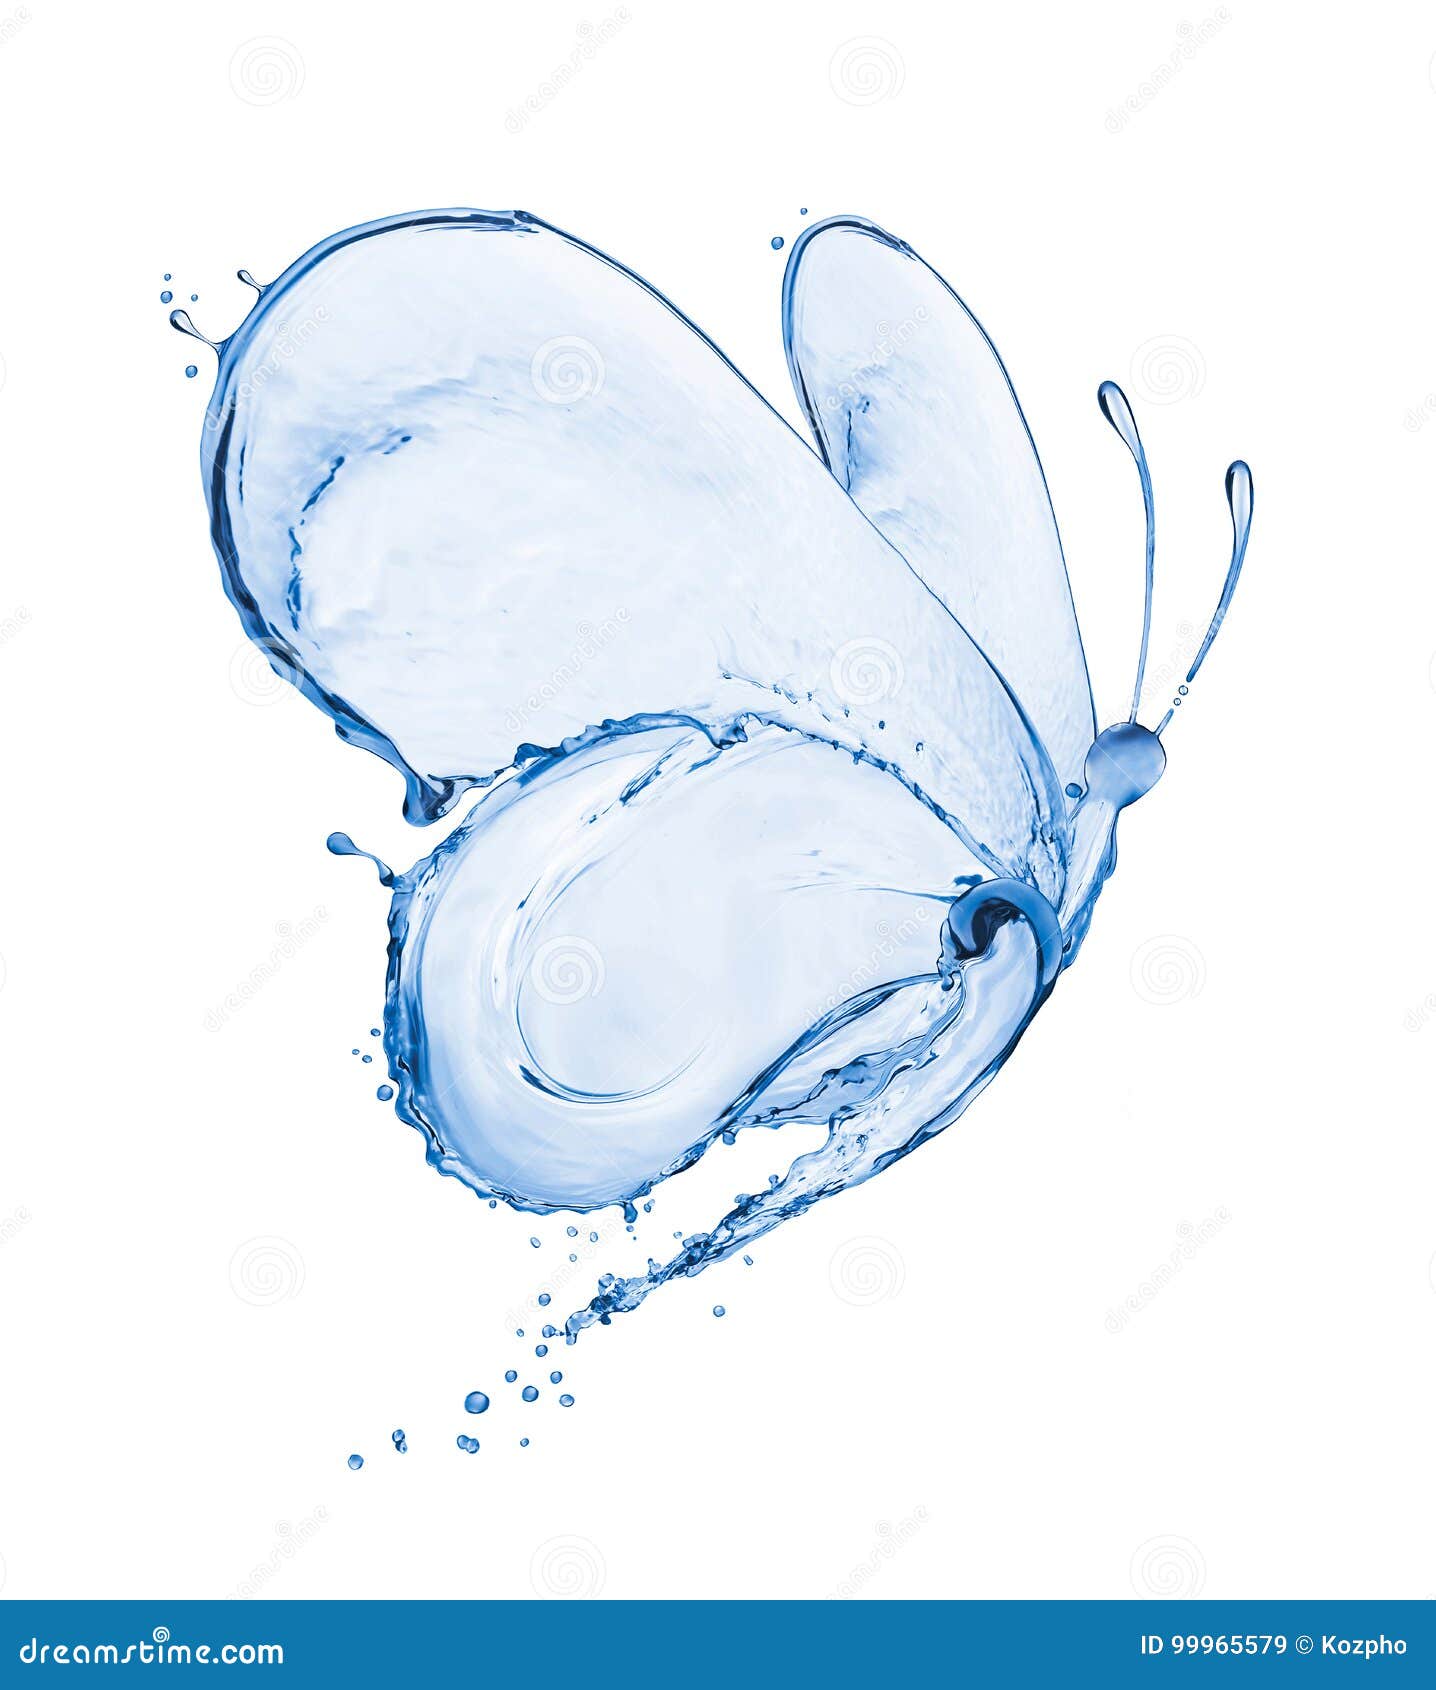 butterfly made of water splashes  on white background